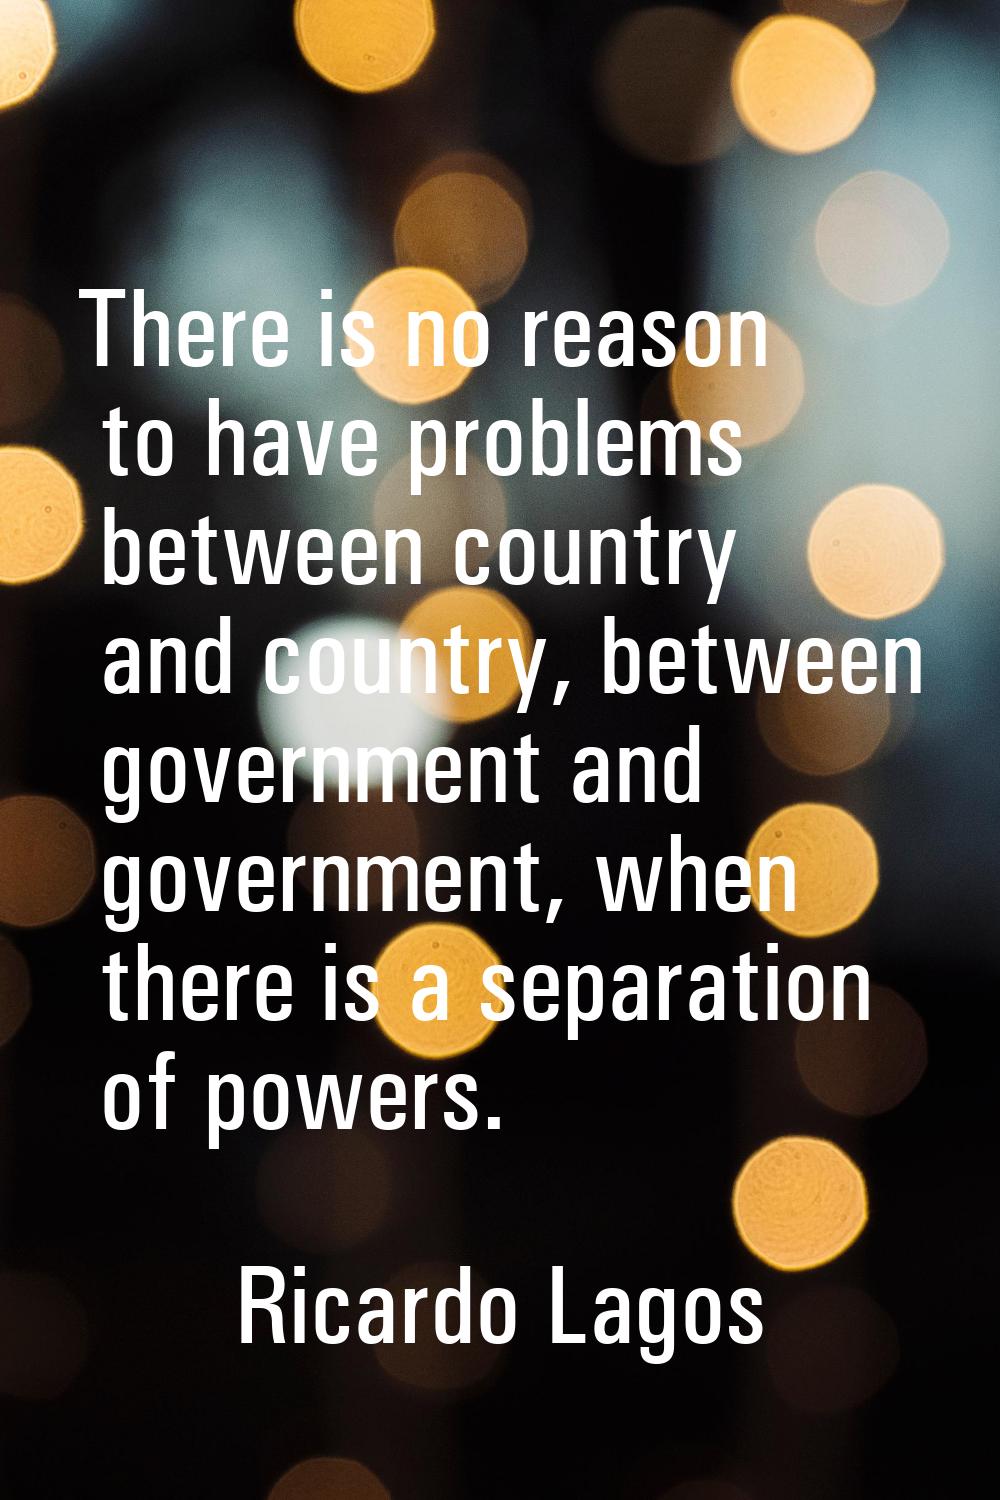 There is no reason to have problems between country and country, between government and government,